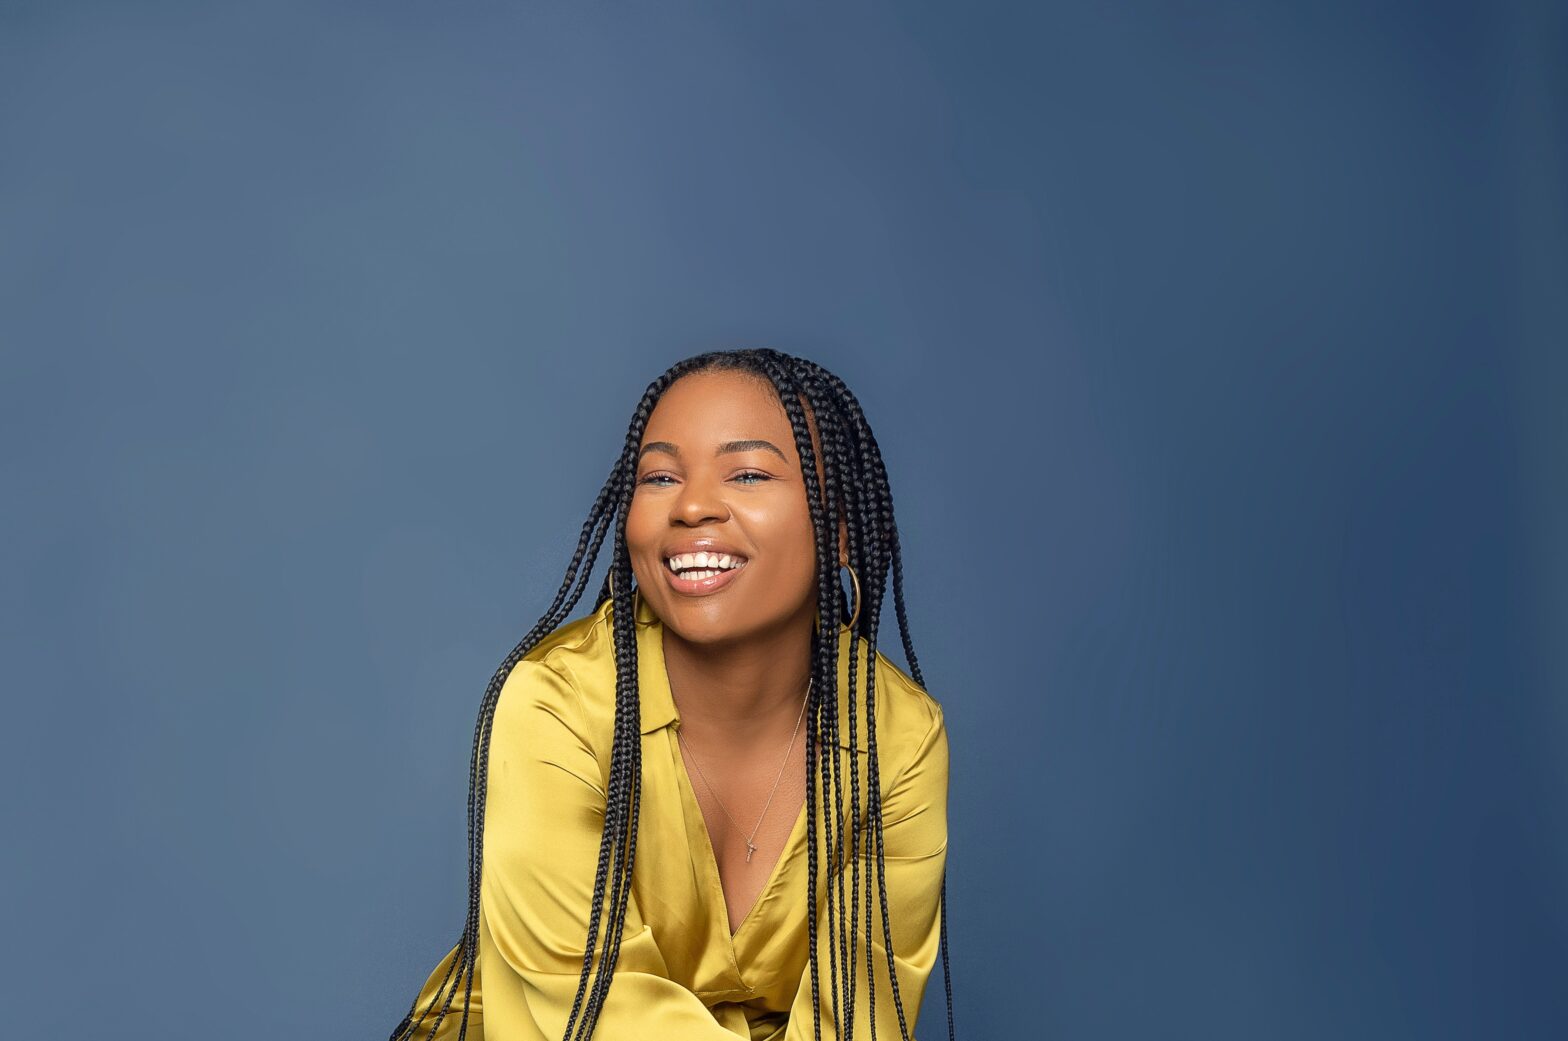 Get inspired by different types of braids that will transform your look, from fulani braids, to knotless, to box braids. Pictured: Black girl smiling with box braids.